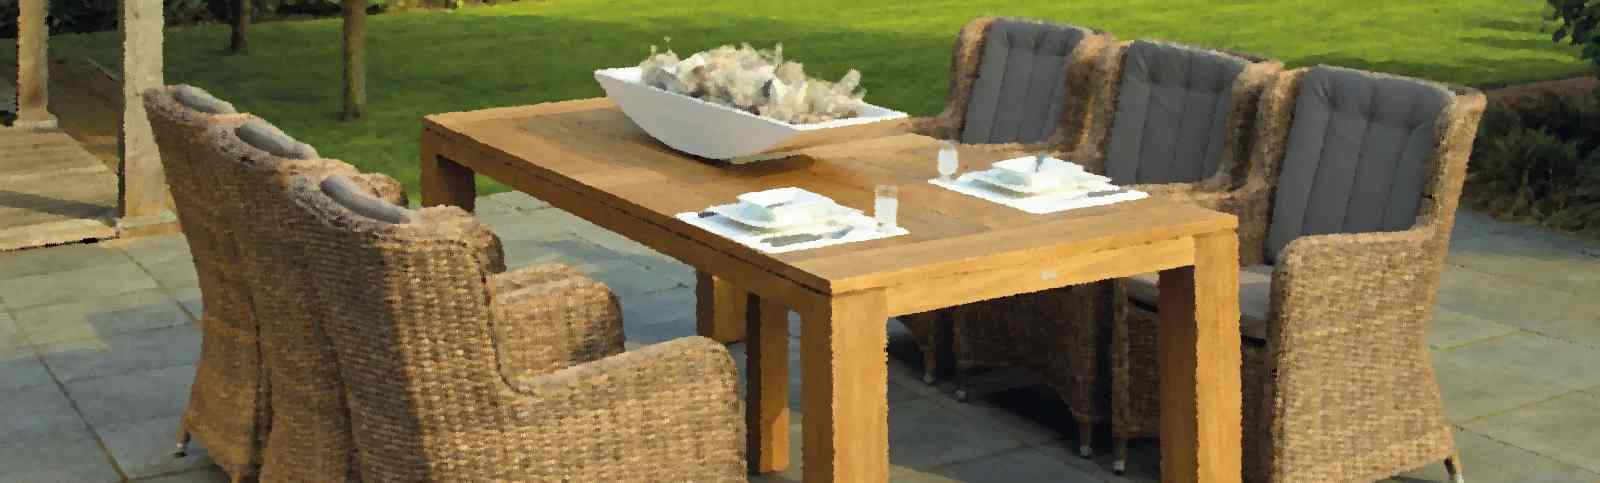 Some Ideas for Selecting the Best Outdoor Furnishings